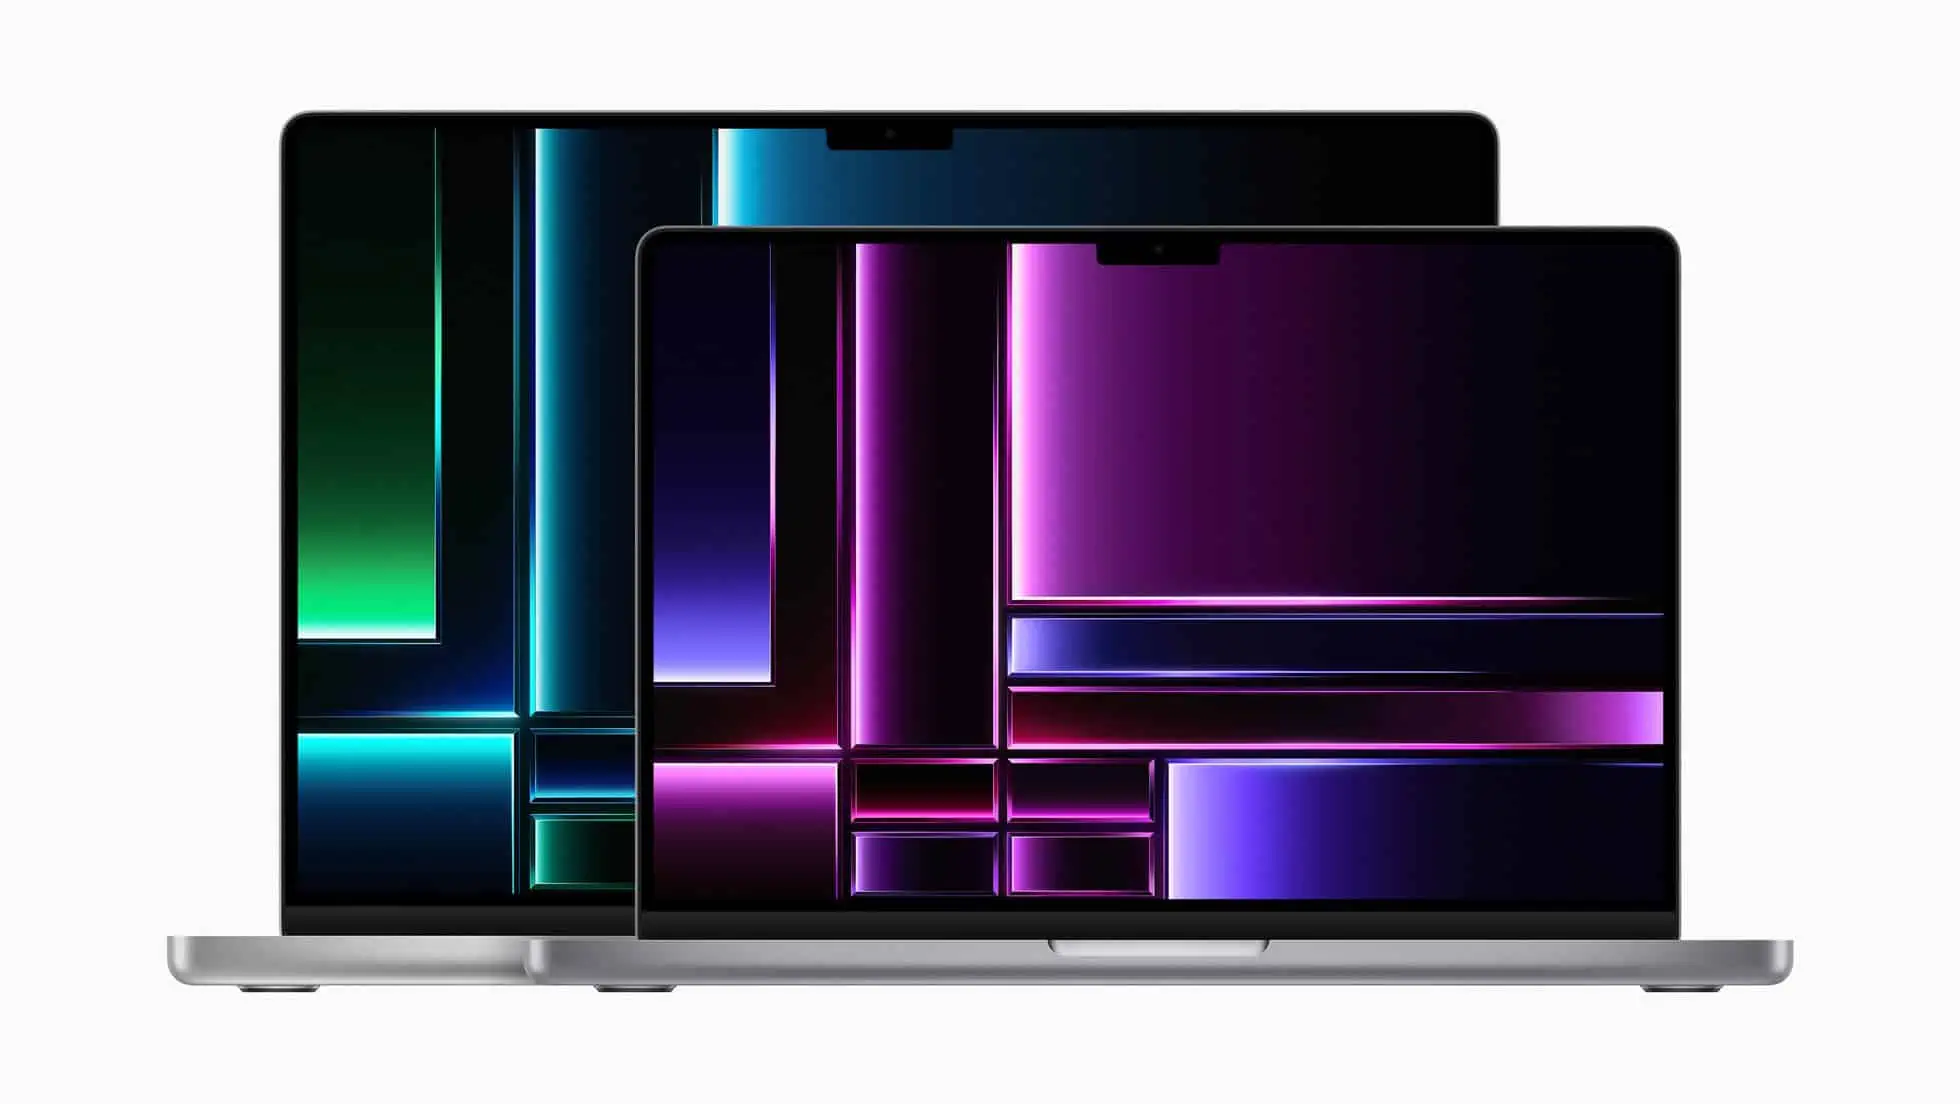 New MacBook Pro with M2 Pro and M2 mac processors